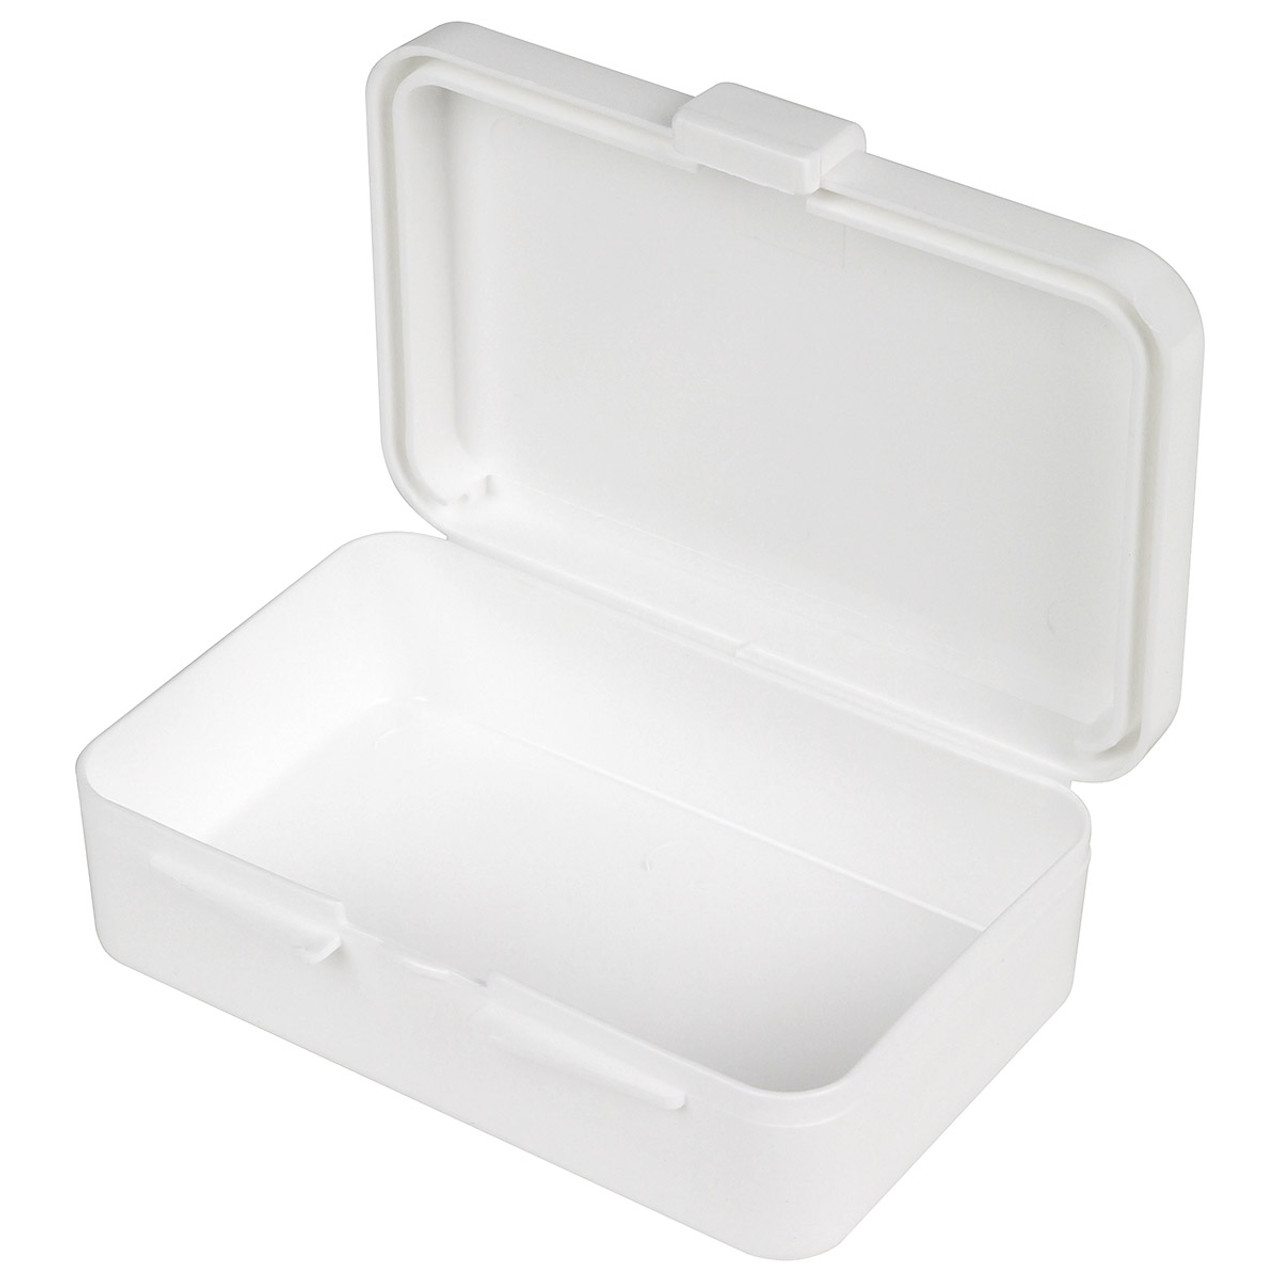 small plastic case, small plastic case Suppliers and Manufacturers